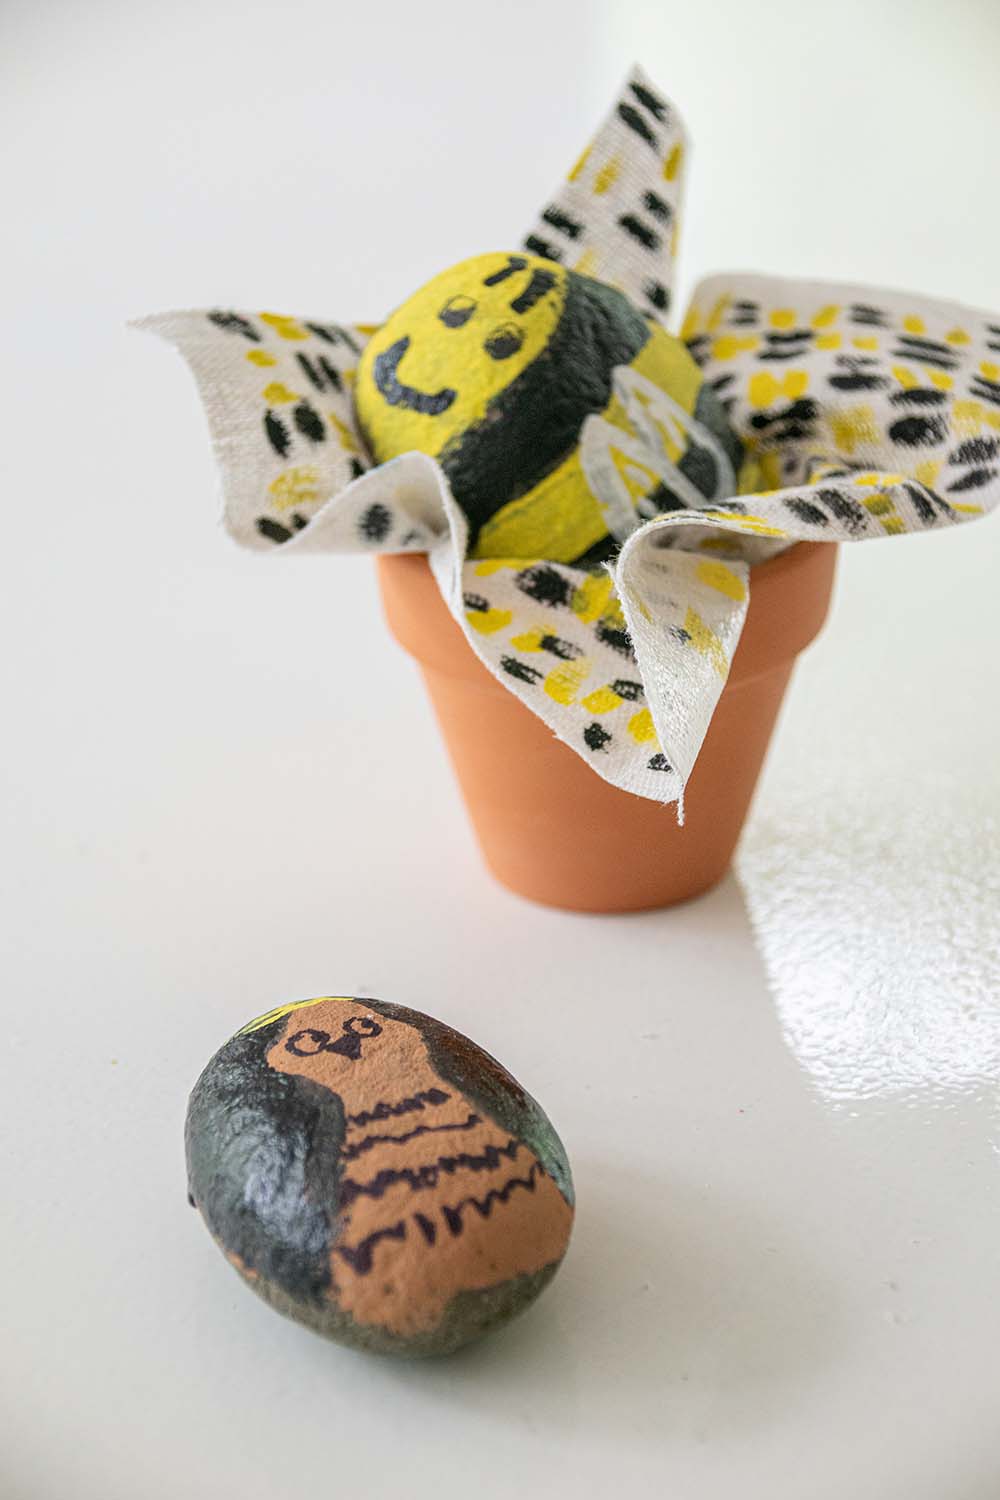 Two painted rocks and a decorated terracotta pot.